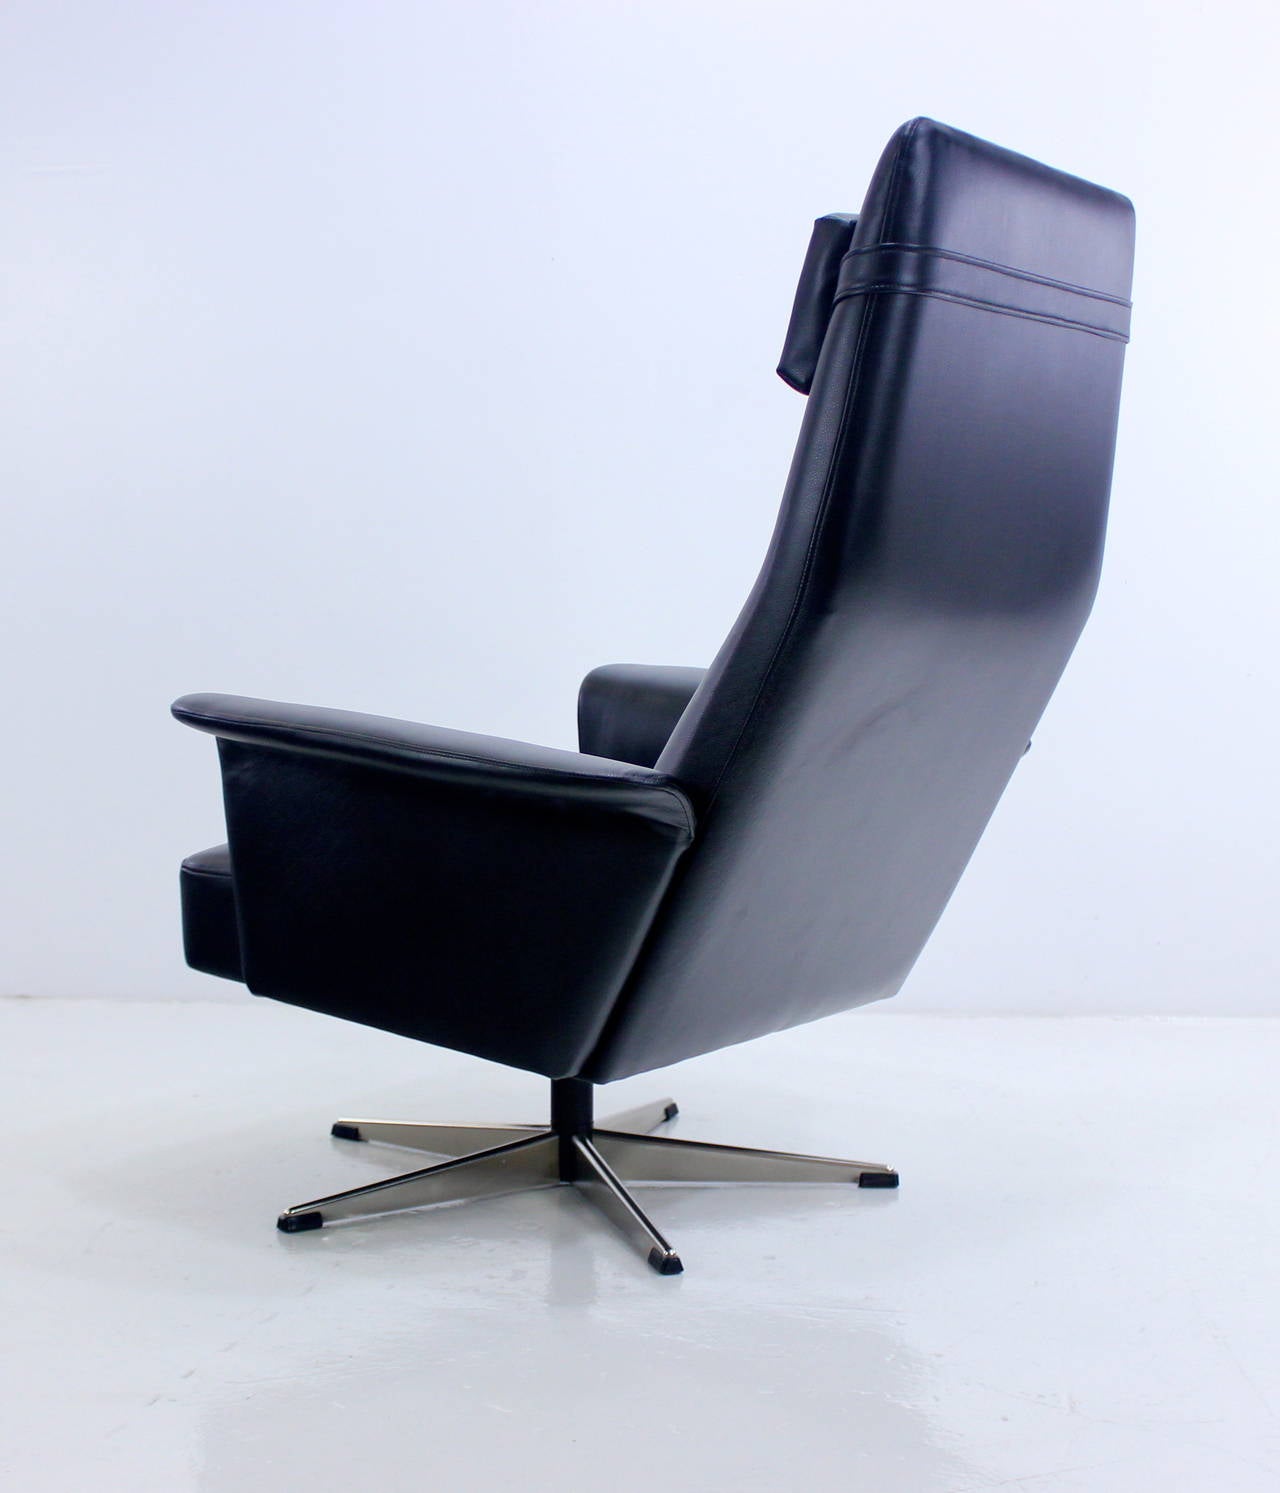 Distinctive Danish Modern Executive Chair In Excellent Condition For Sale In Portland, OR